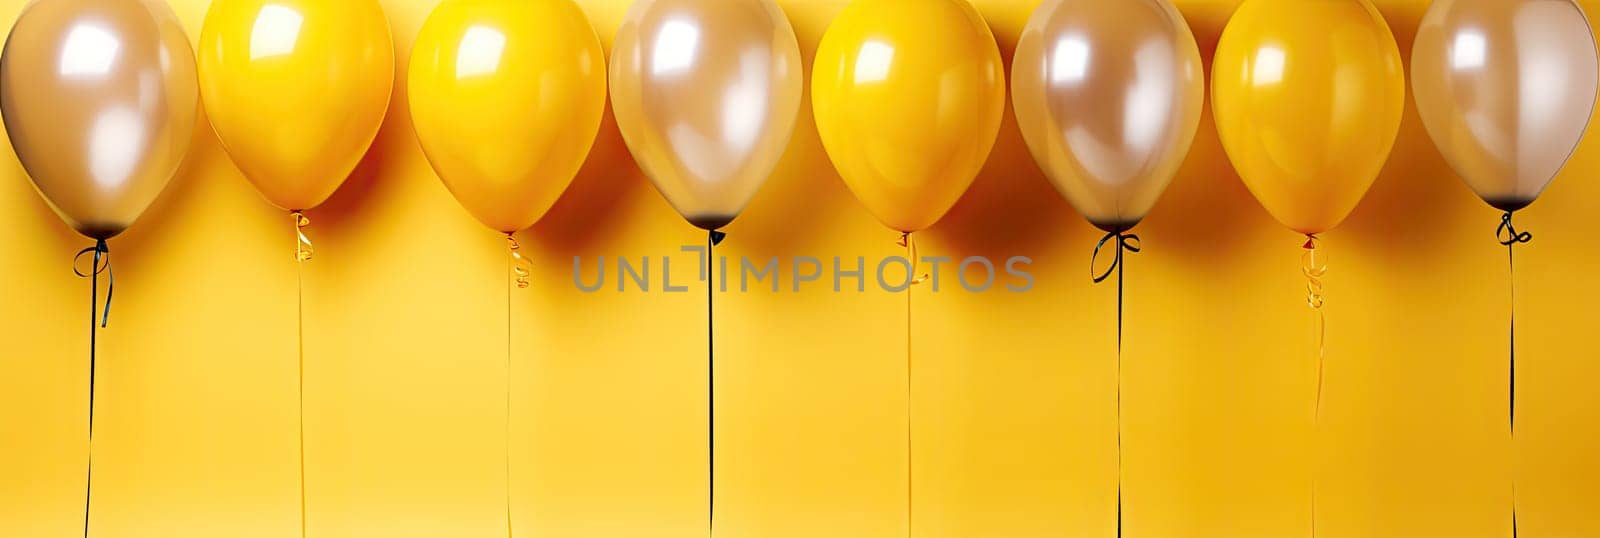 Colorful balloons on a bright yellow background